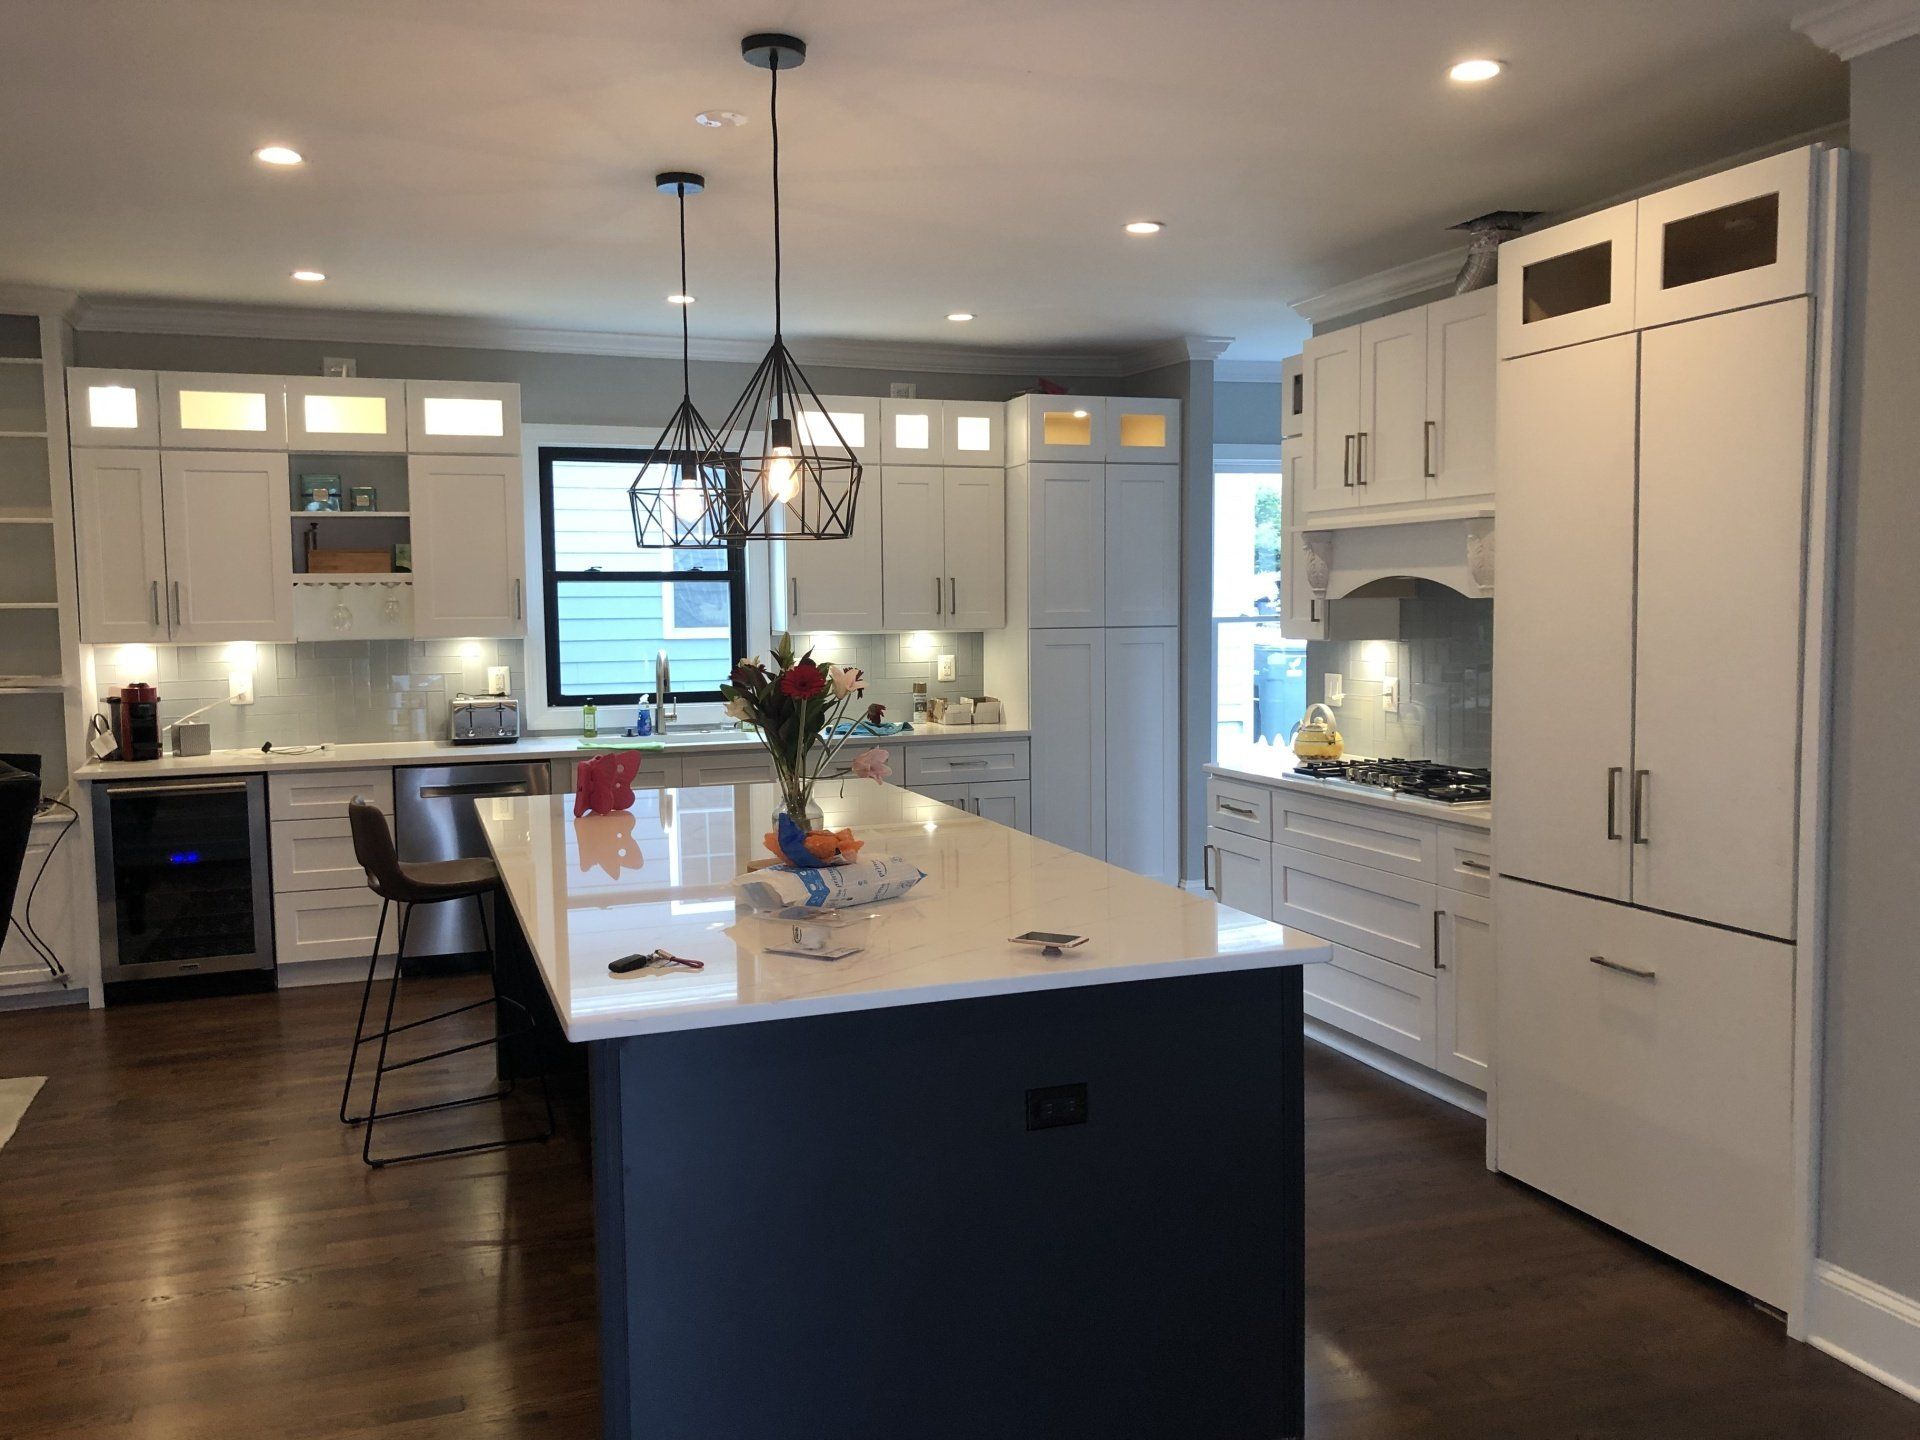 a kitchen with white cabinets and a large island in the middle .